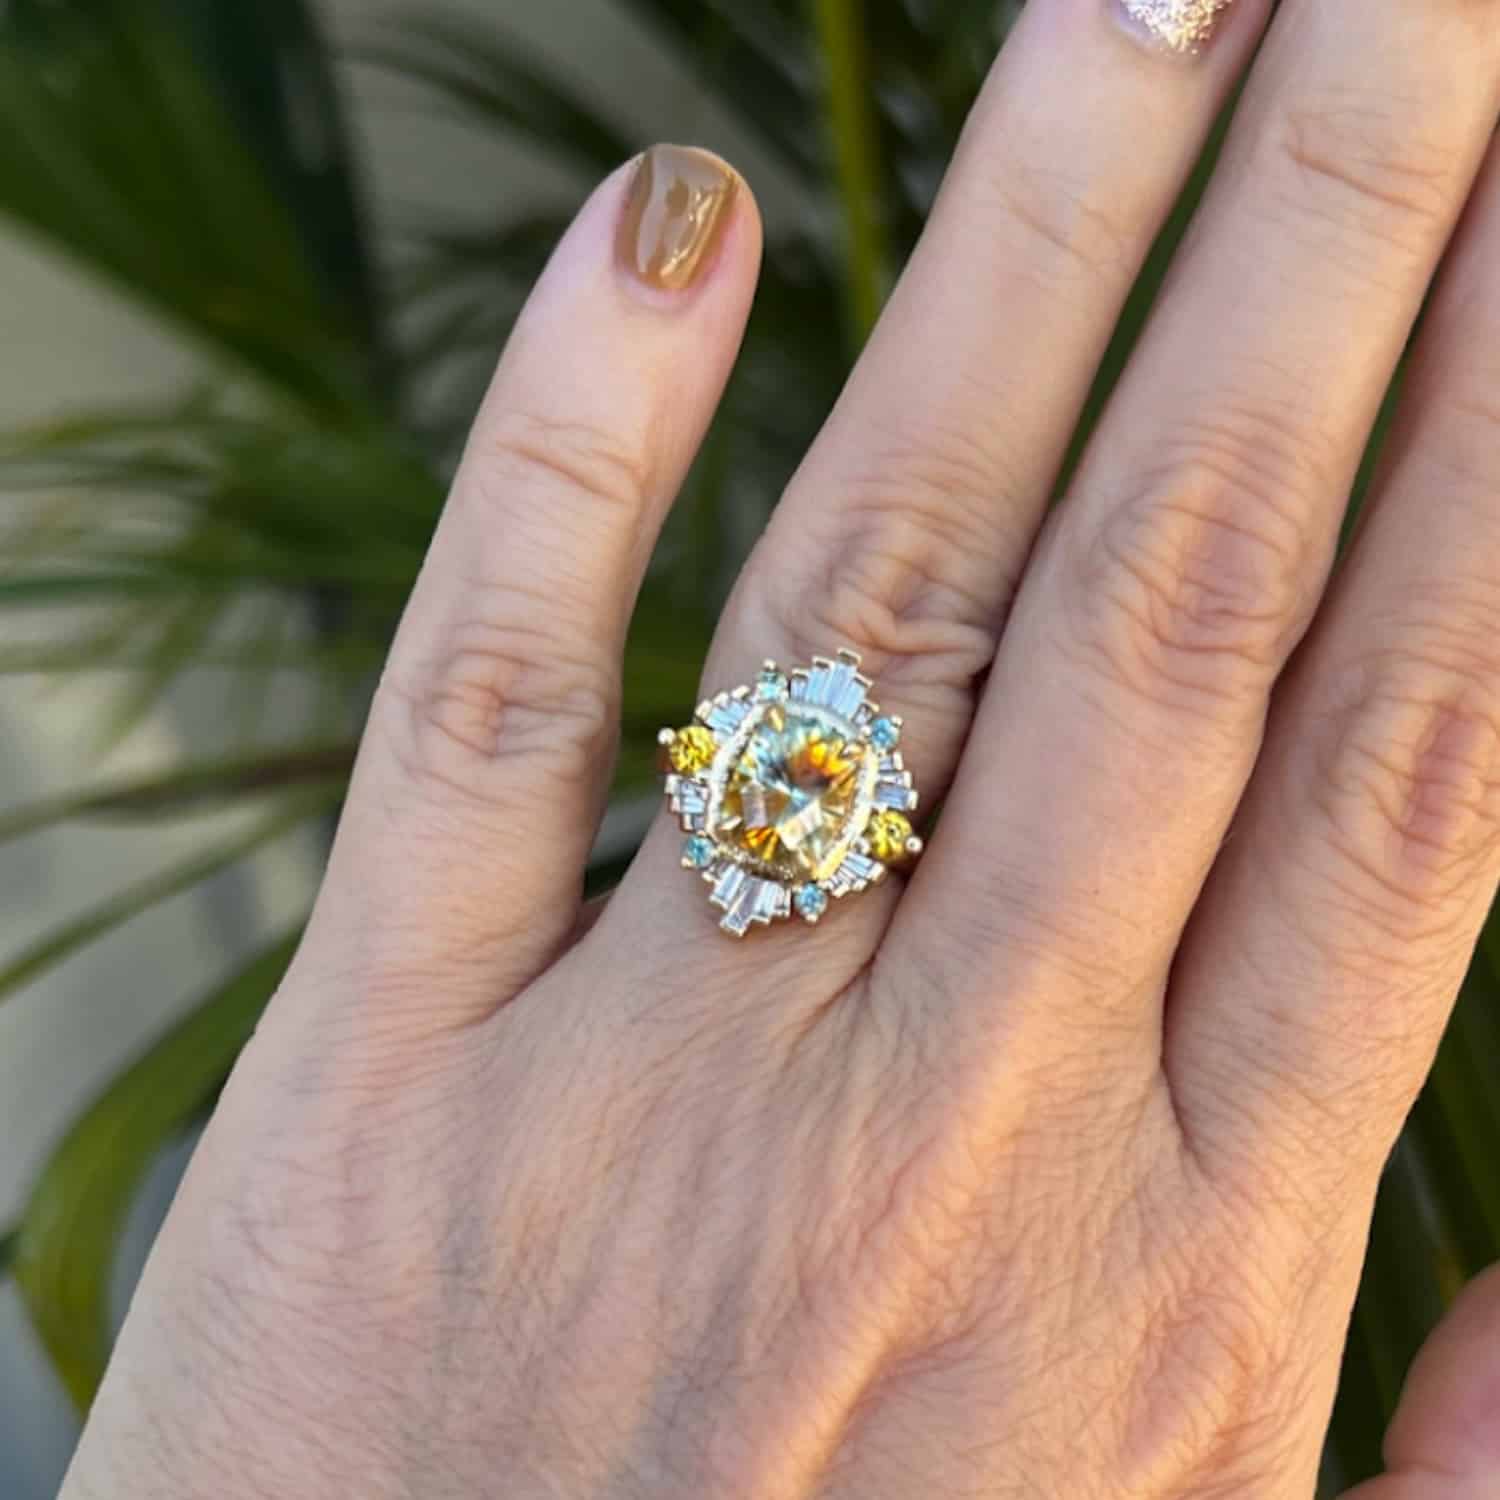 A photo from a customer review featuring a custom halo ring with a large particolored Montana sapphire, on a well manicured hand against a green houseplant.